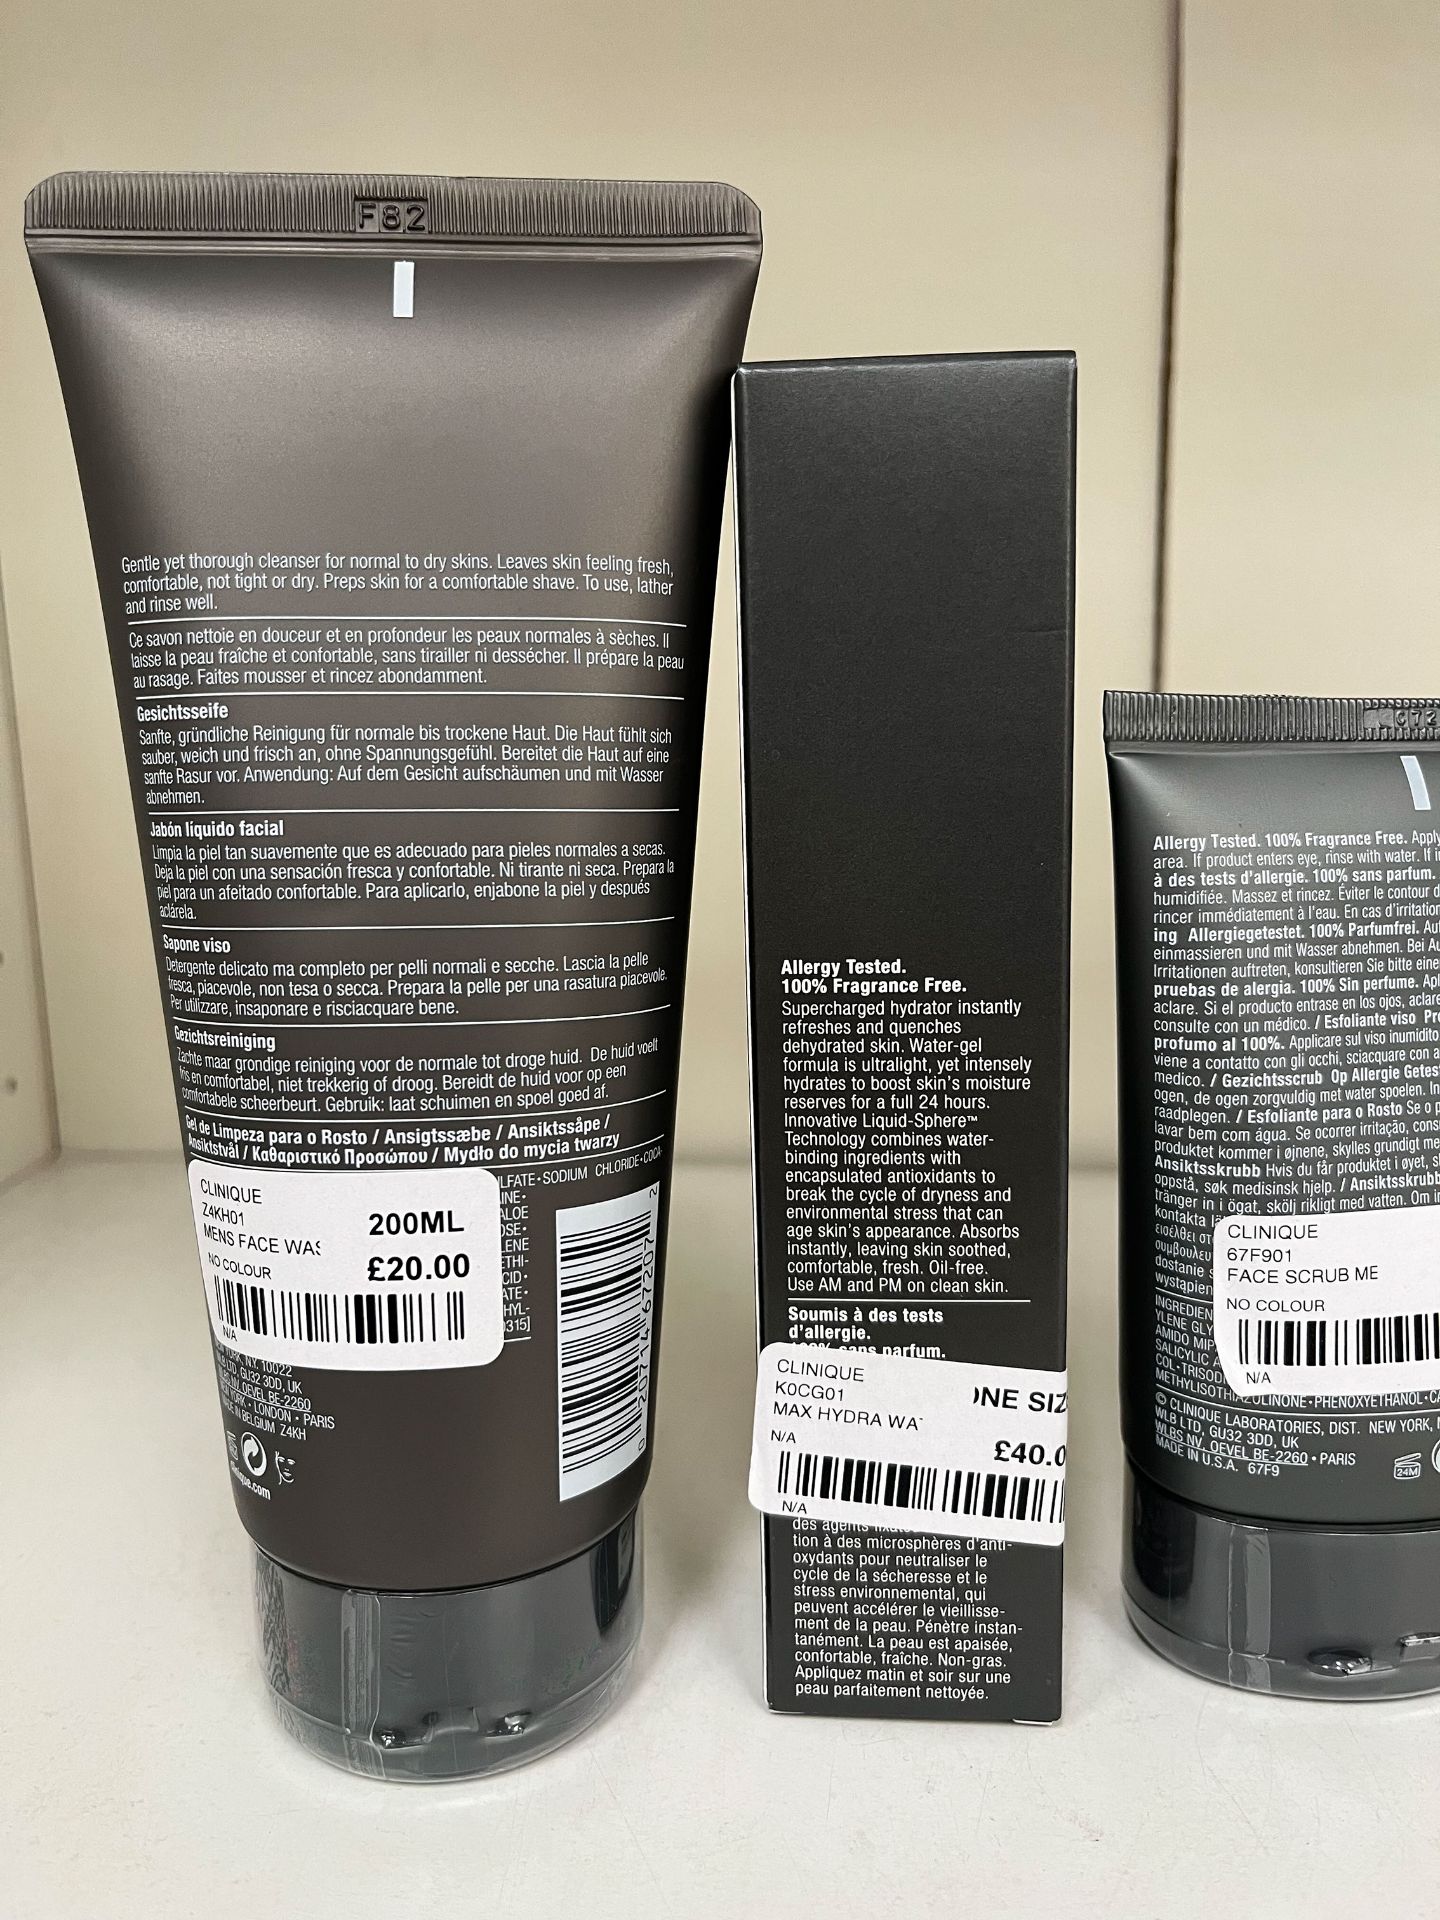 A Selection of Clinique Men's Facial Products - Image 2 of 3